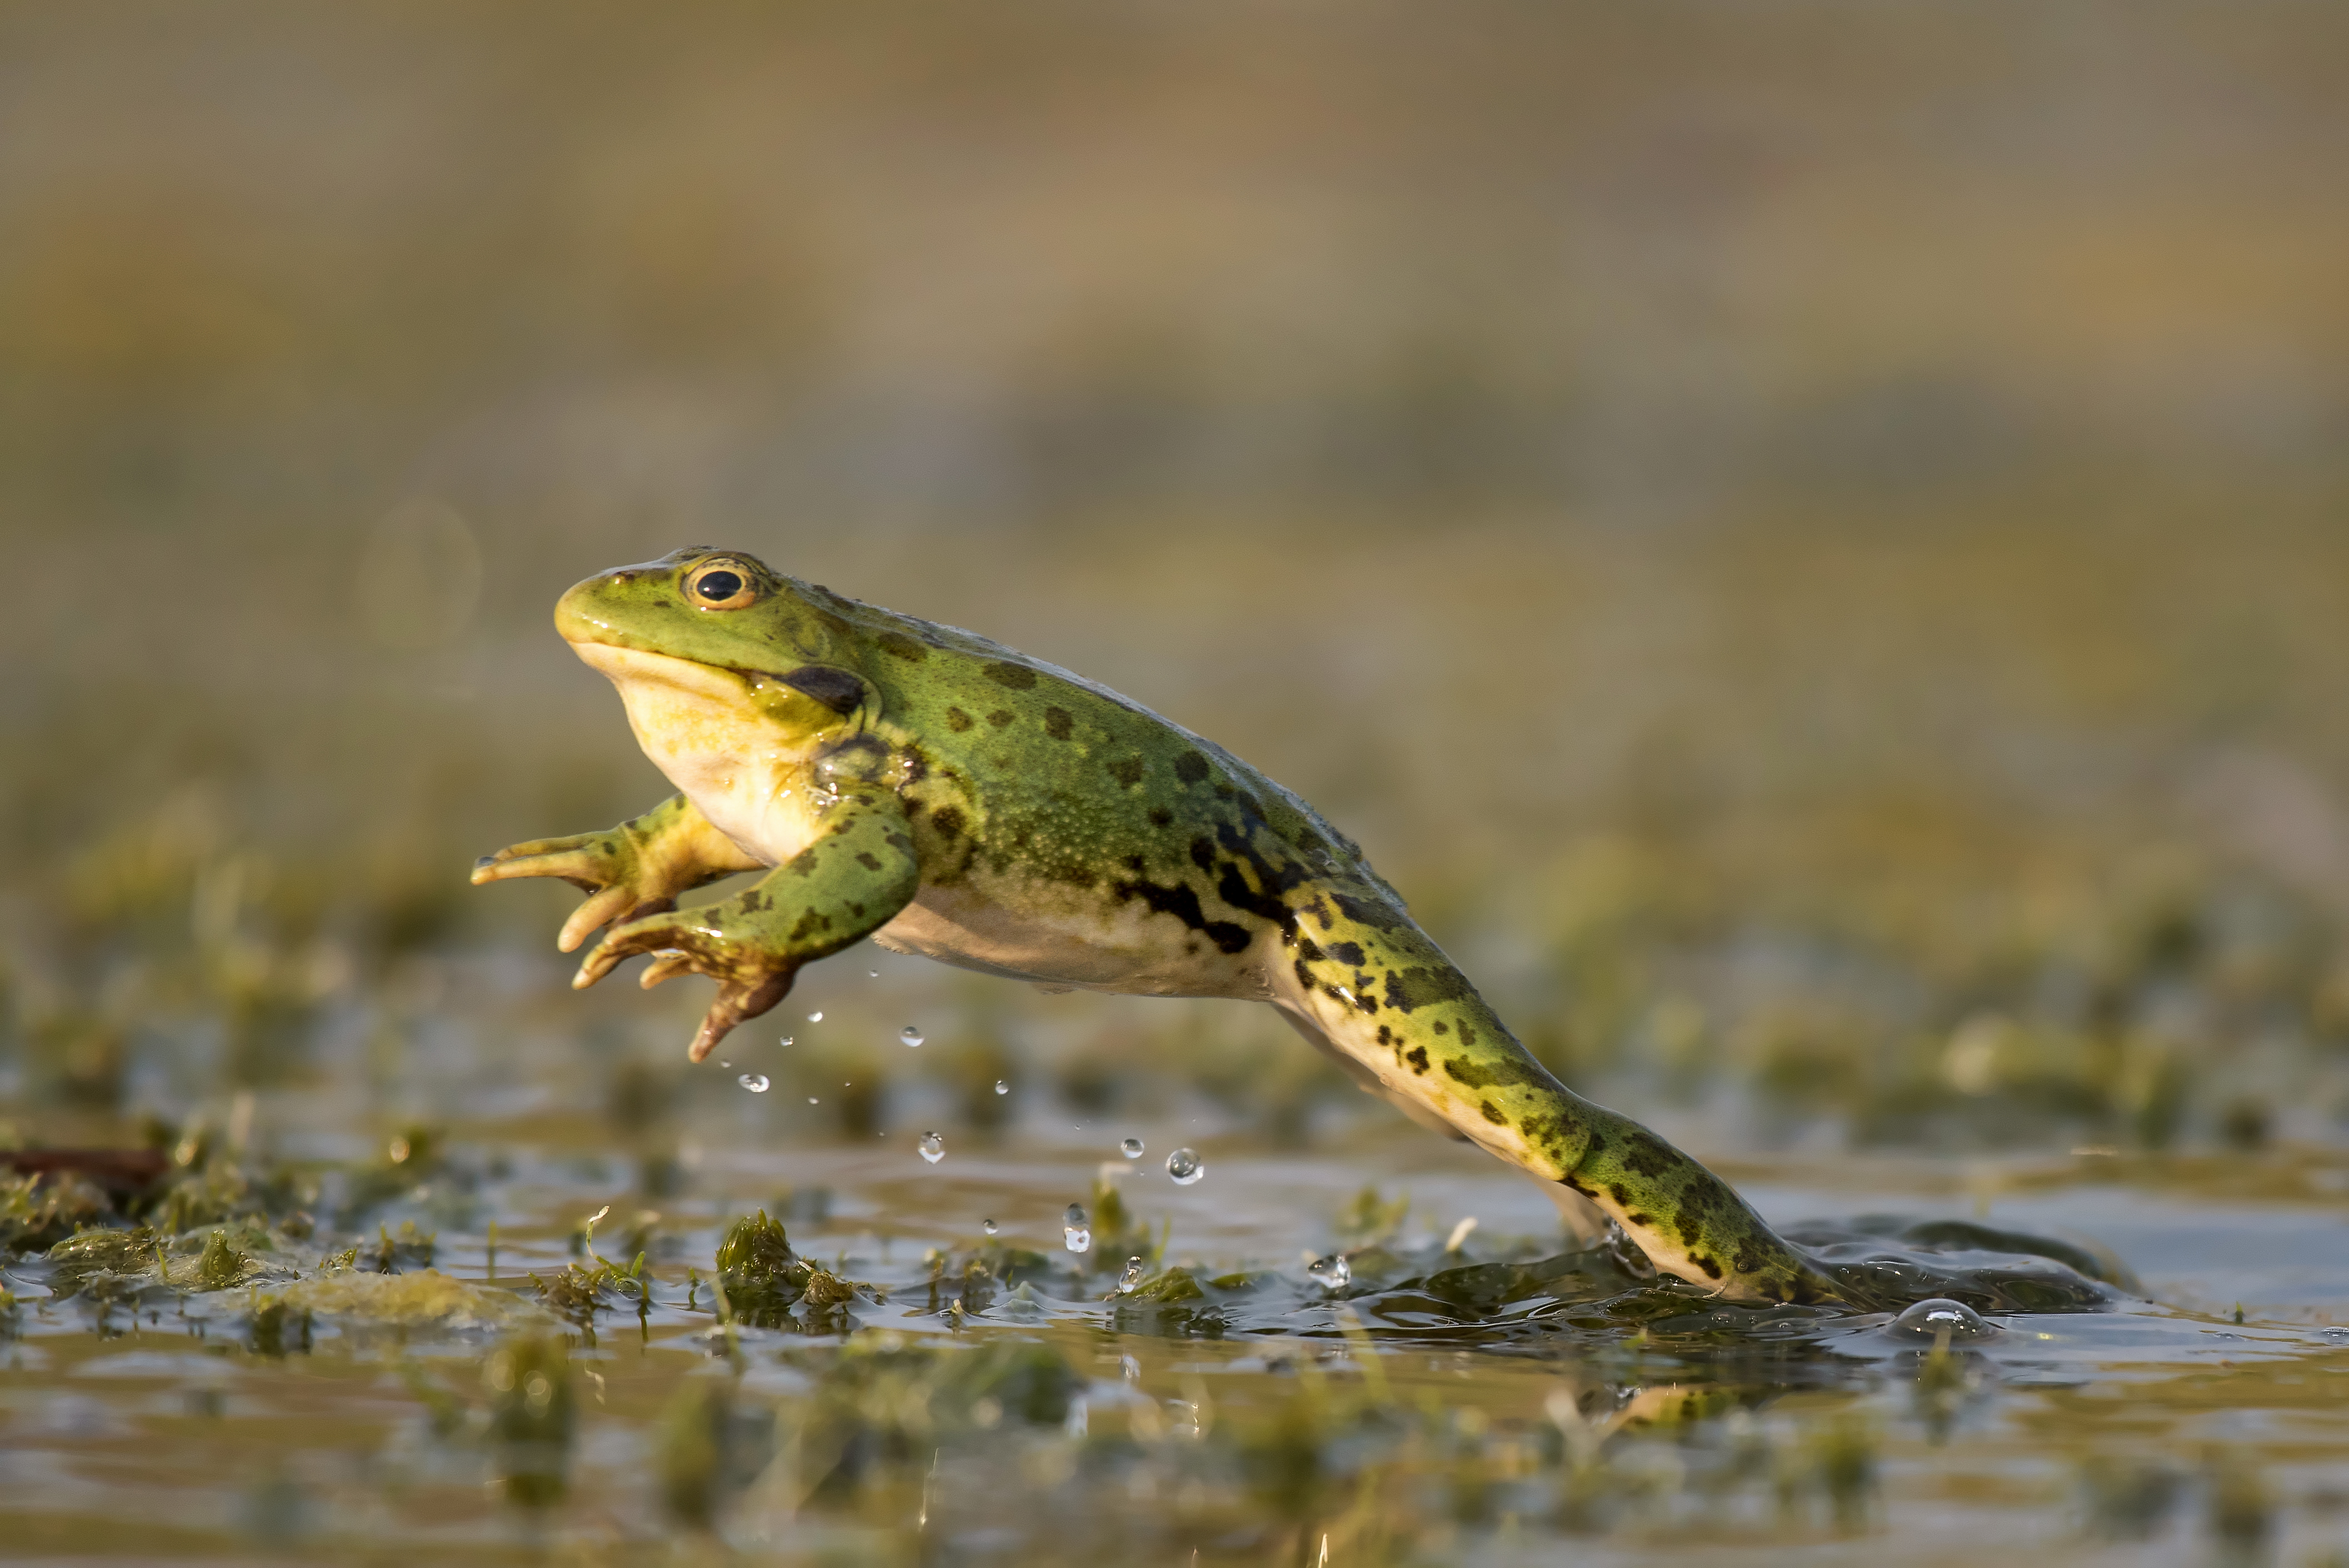 These 5 Fun Facts About Frogs Aren't Well Known to Many - AZPetVet